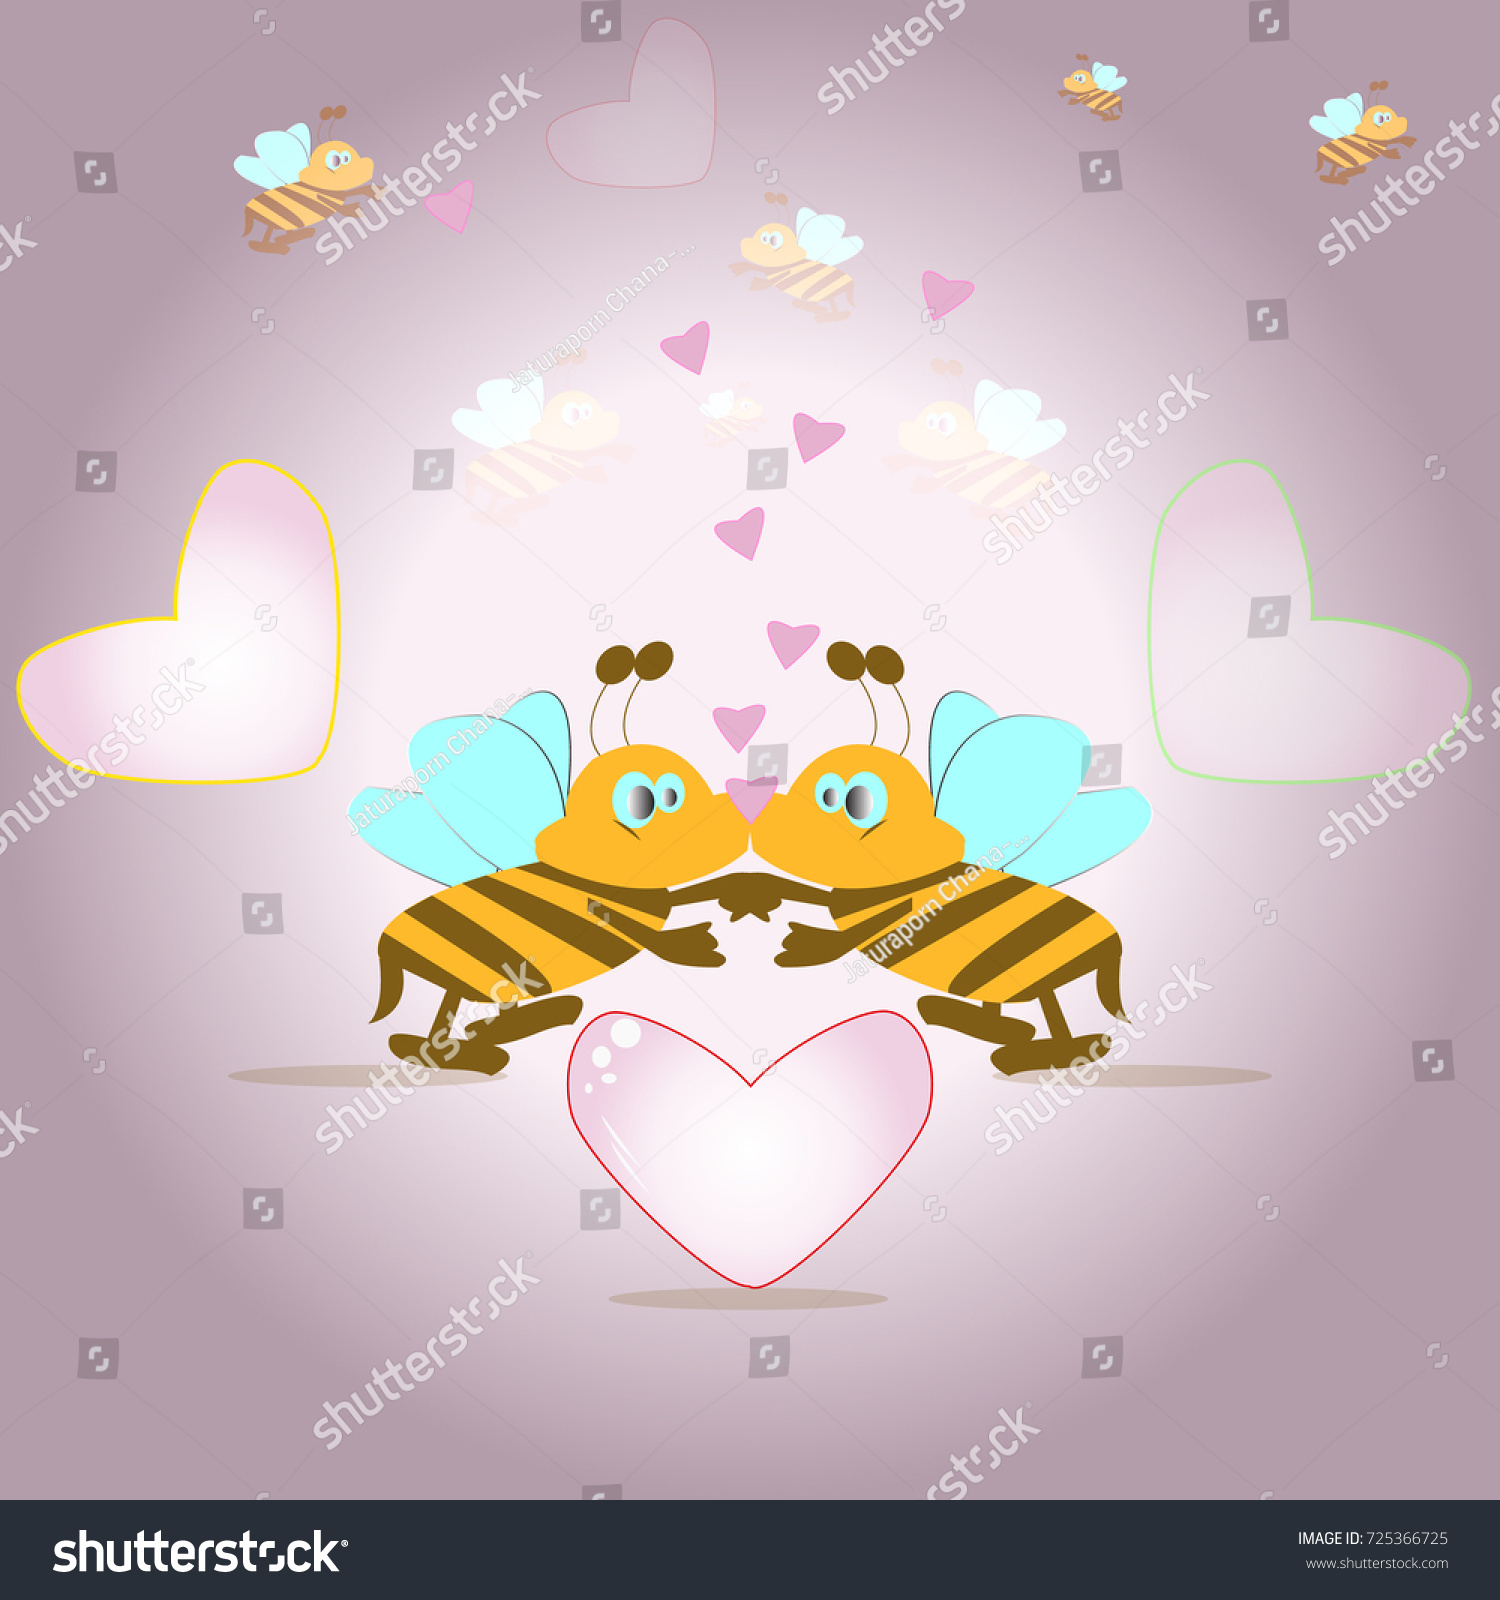 Two Little Bees Kiss Each Other Stock Vector HD (Royalty Free ...